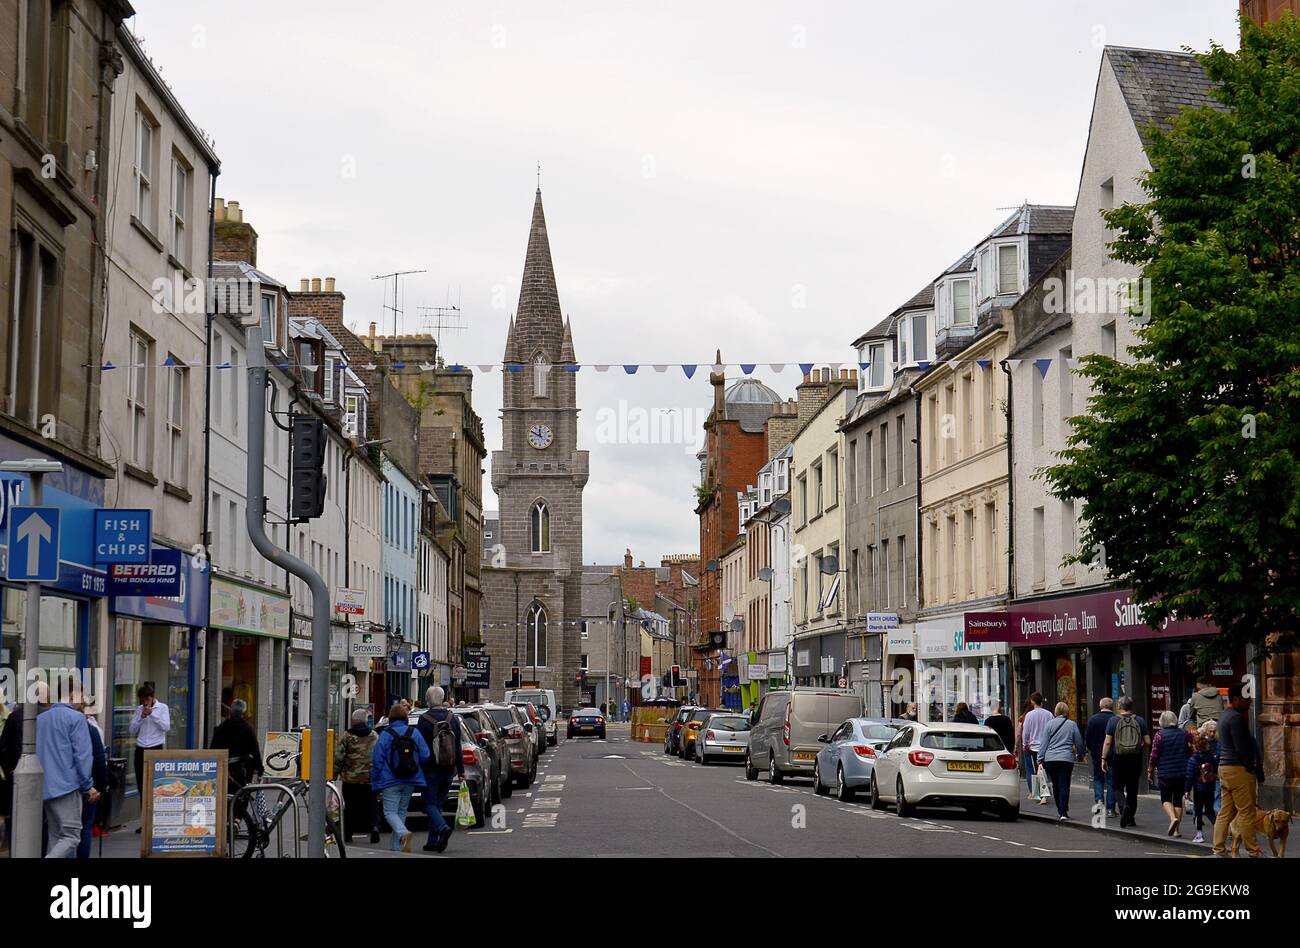 PERTH, SCOTLAND - 25 JUNE 2021: Shoppers fill the city's Old High Street dominated by the steeple of St Paul's Church Stock Photo